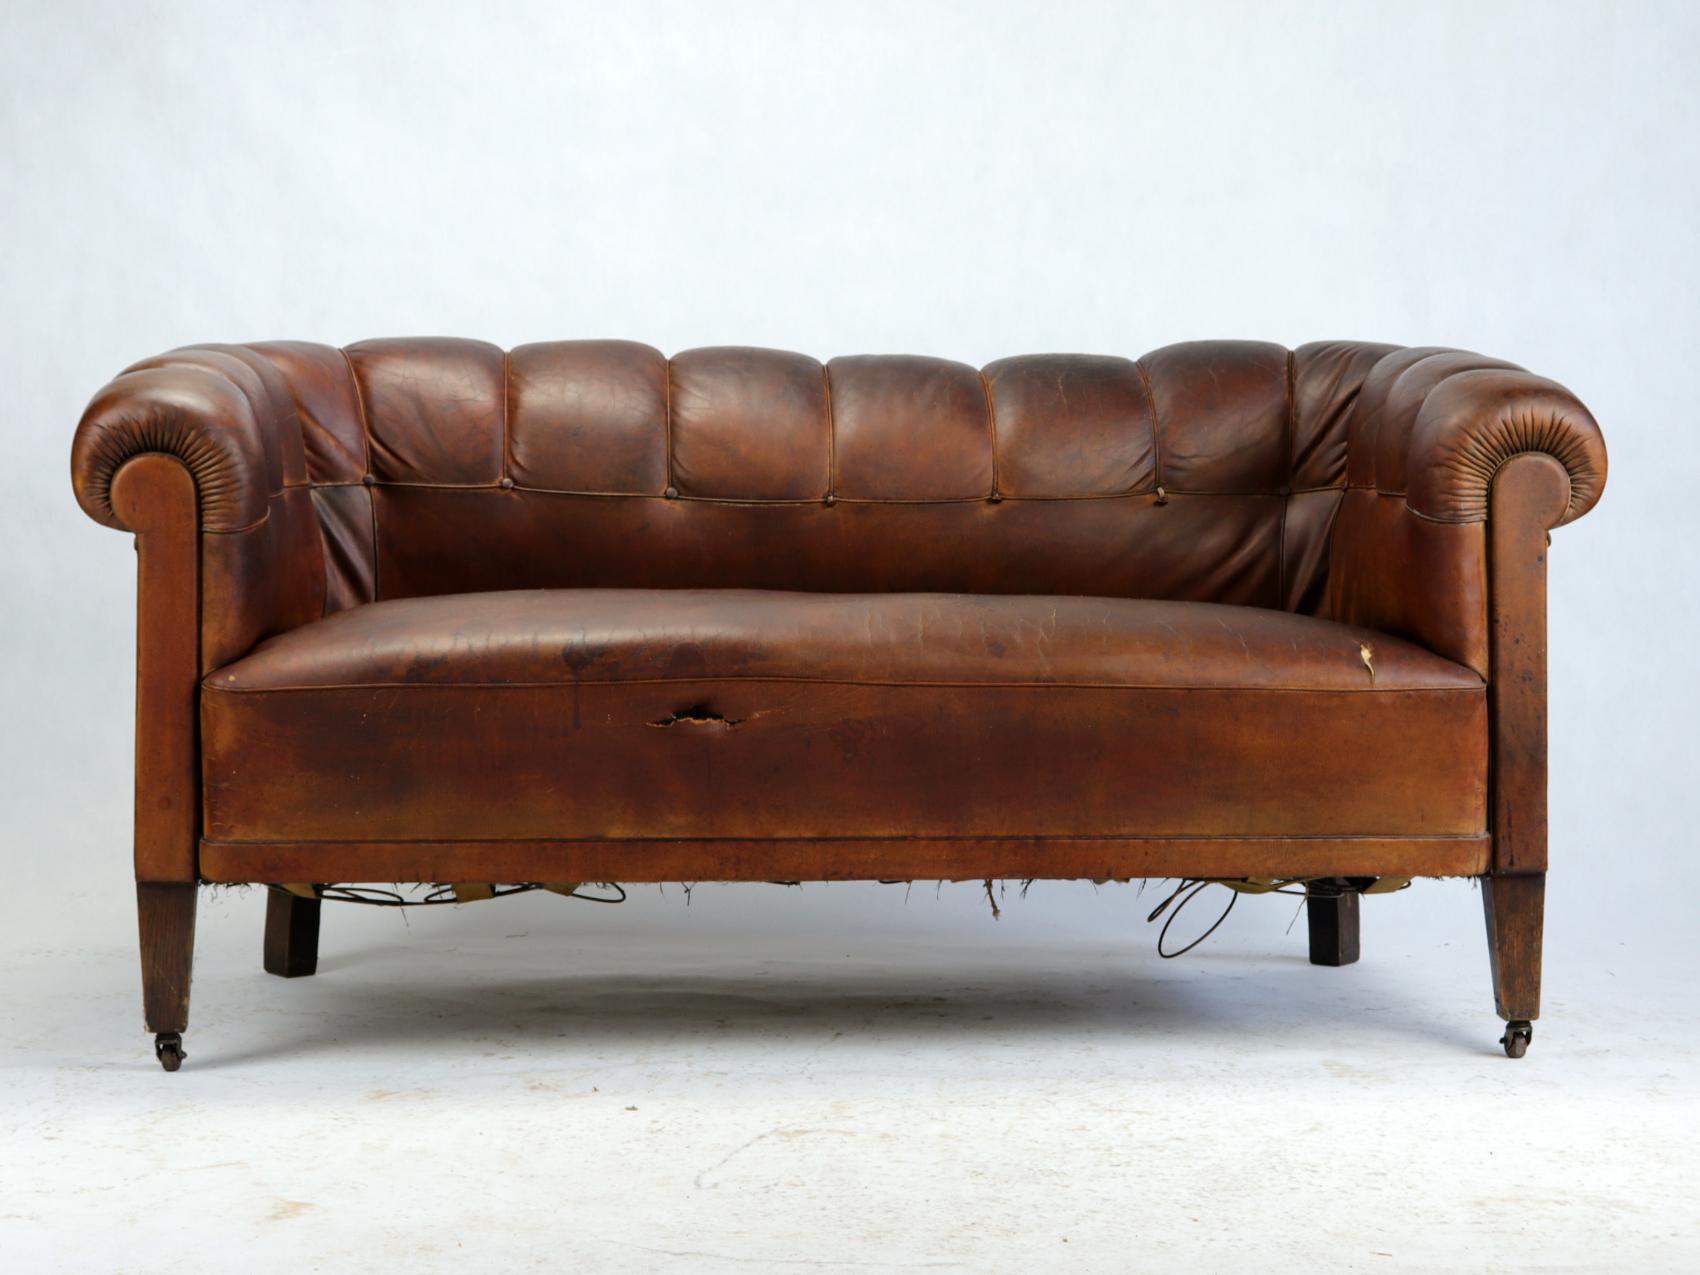 Antique Art Deco brown leather seating set consisting of two barrel club chairs and a sofa with great Aged Patina.
These stylish club chairs have a great shape due his shell back and have wheels at the front.

The frame is still firm and the seat